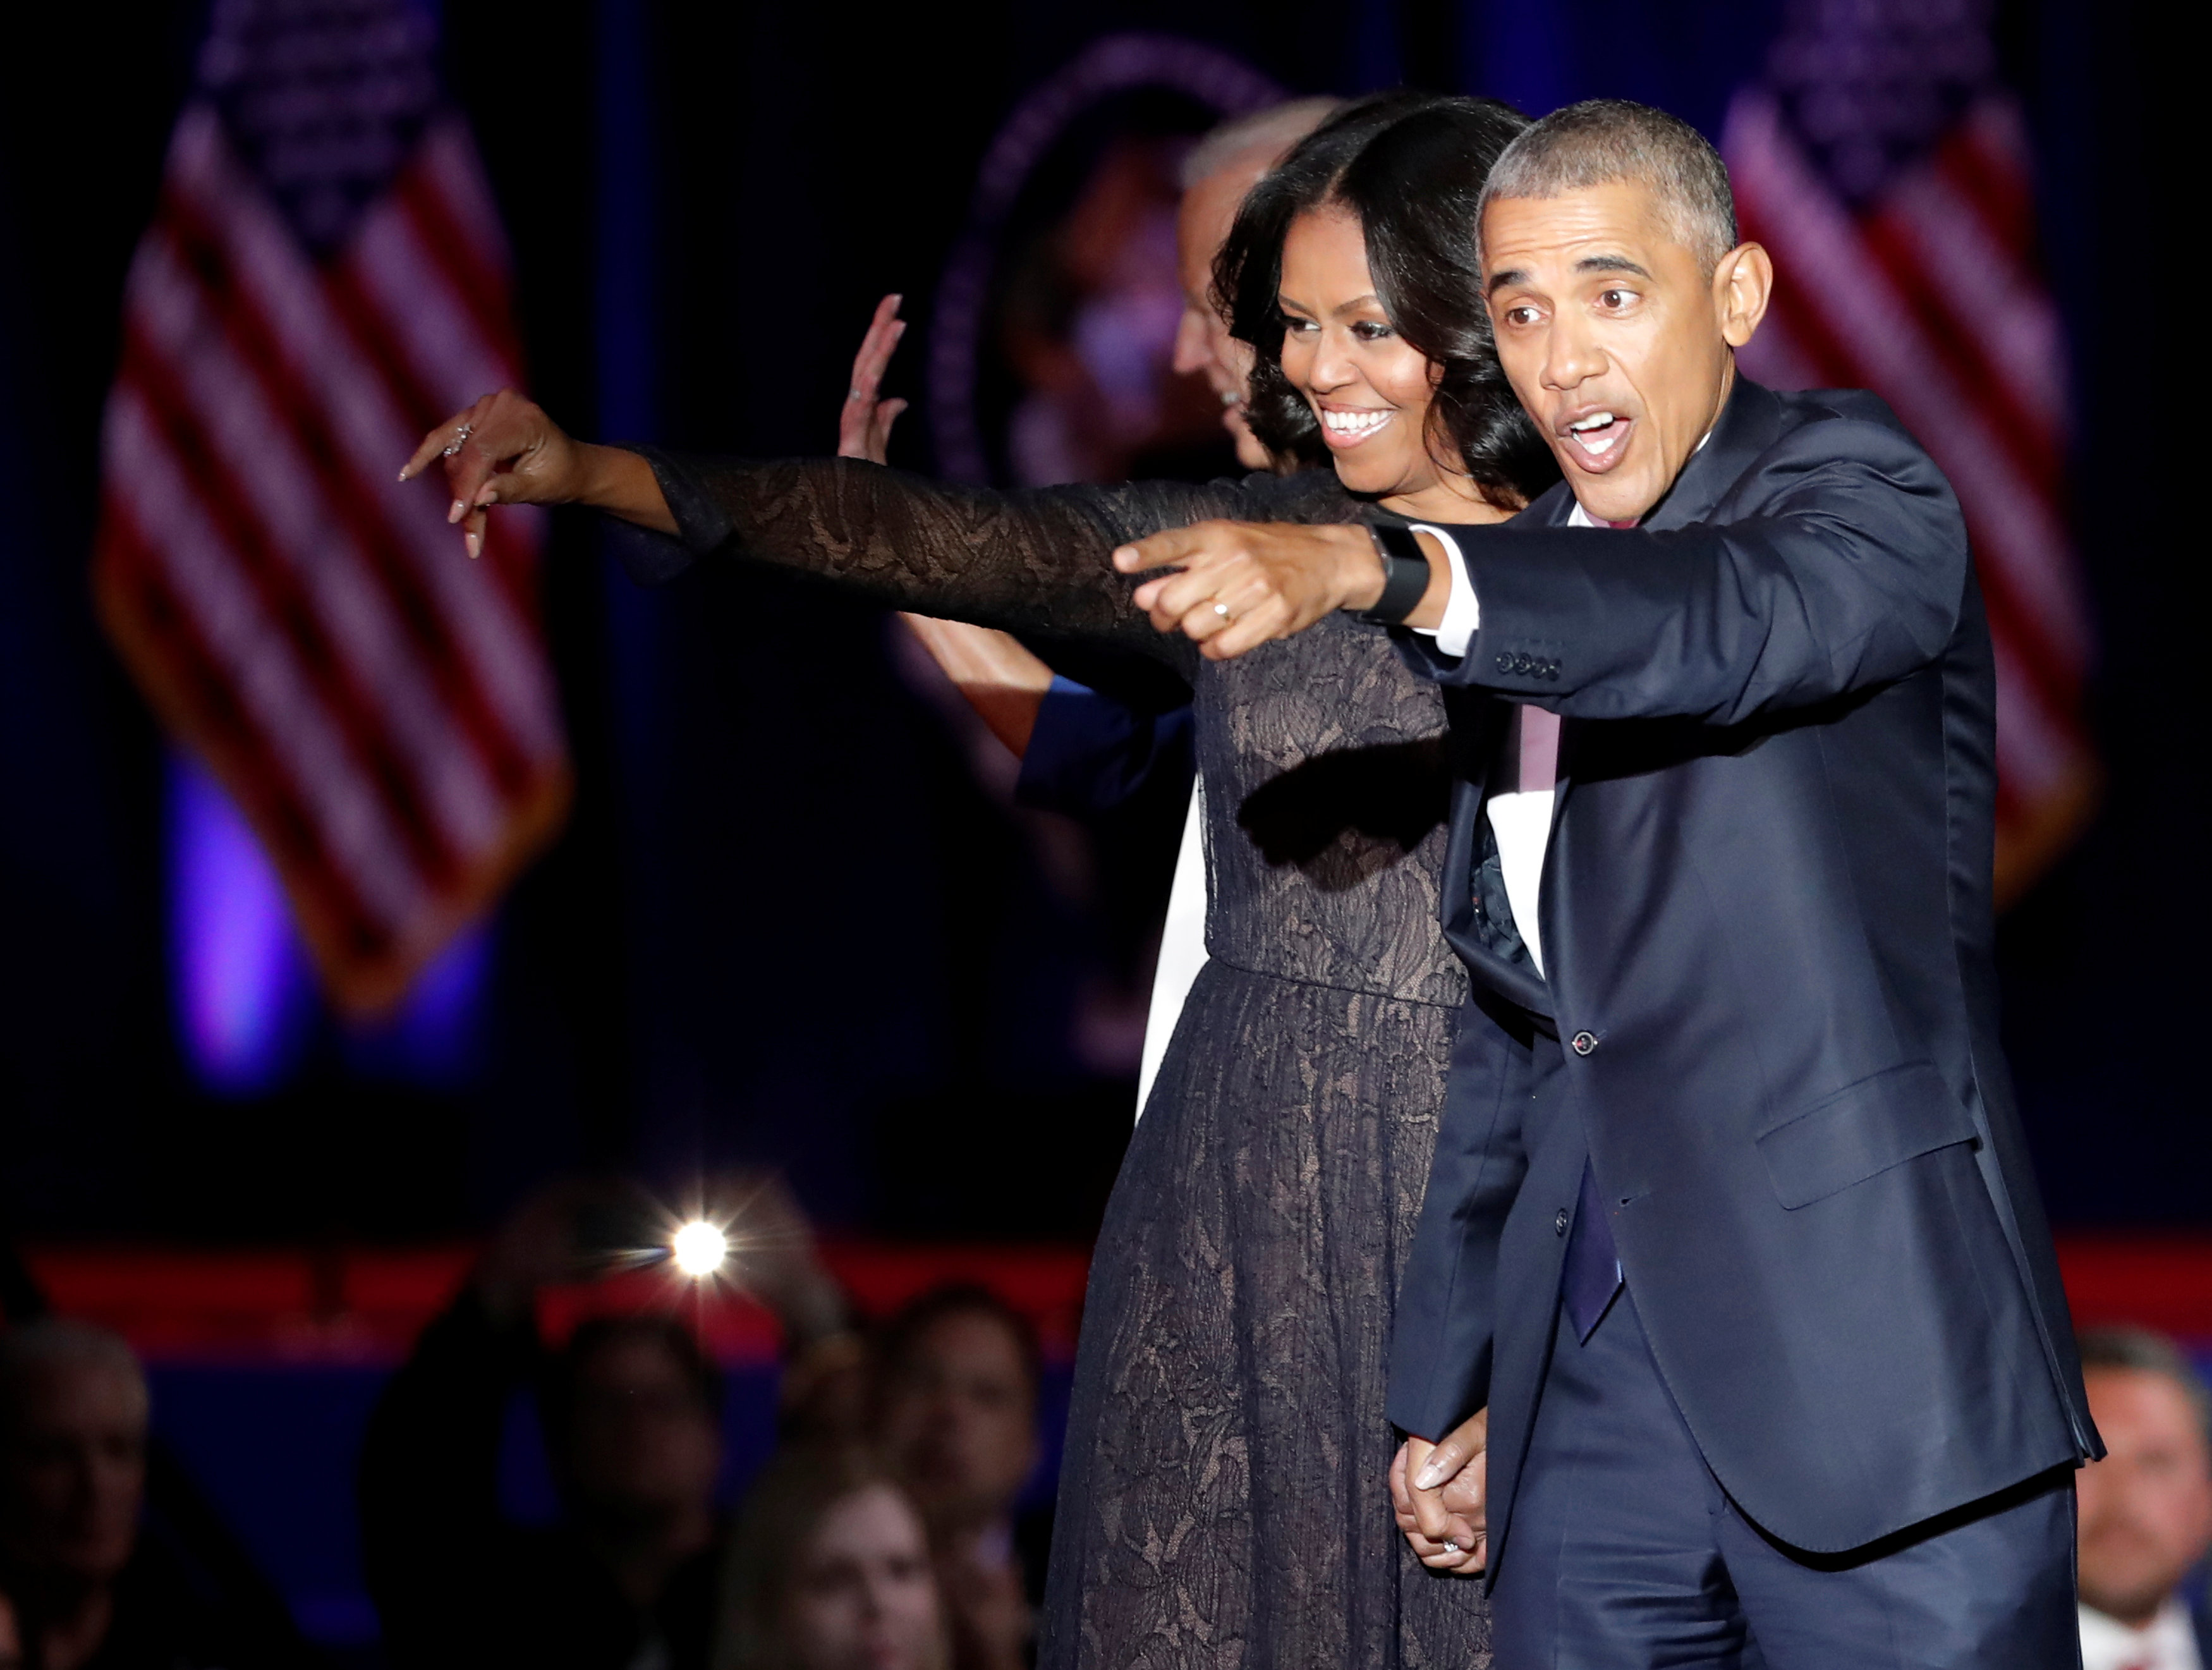 U.S. President Barack Obama and his wife Michelle acknowledge the crowd after President Obama delivered a farewell address at McCormick Place in Chicago, Illinois, U.S. January 10, 2017. REUTERS/John Gress